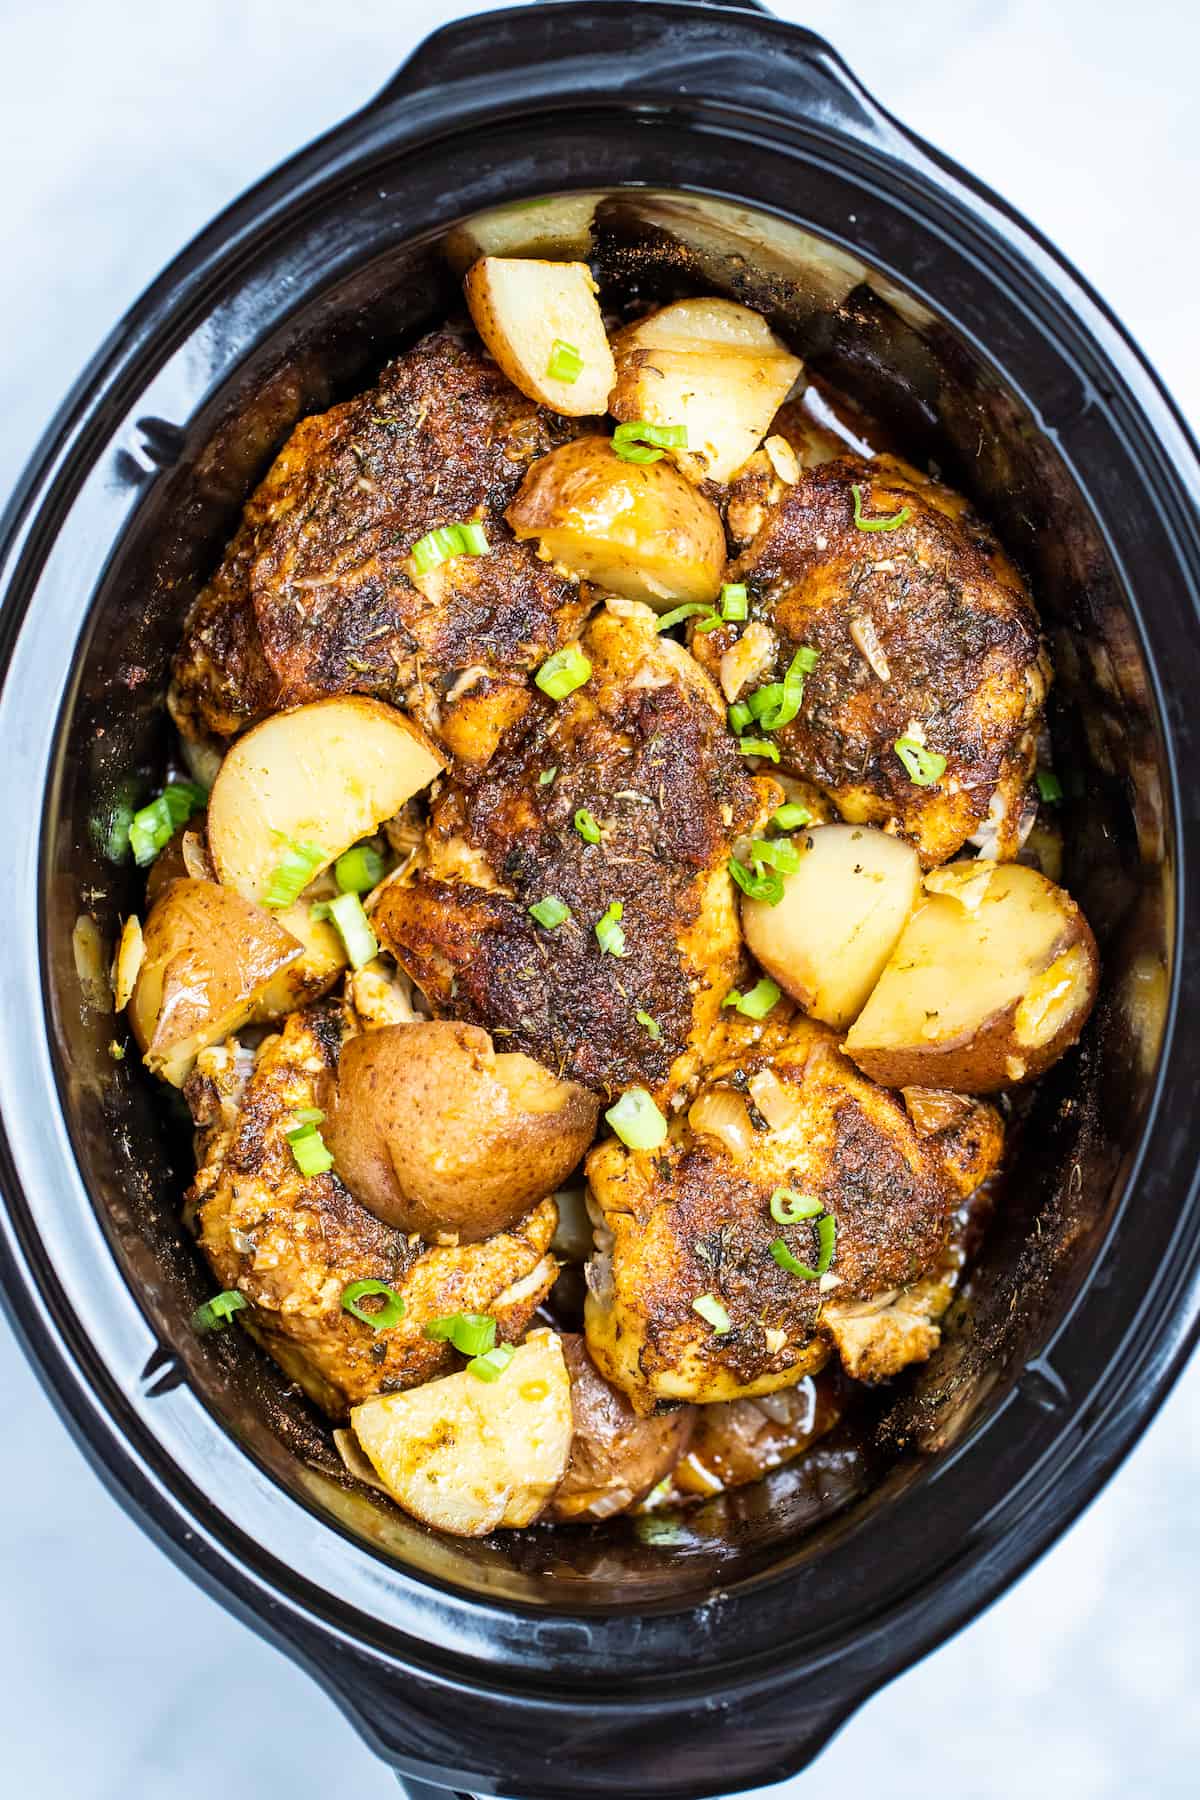 Slow cooker full of chicken thighs and potatoes topped with chopped green onions.